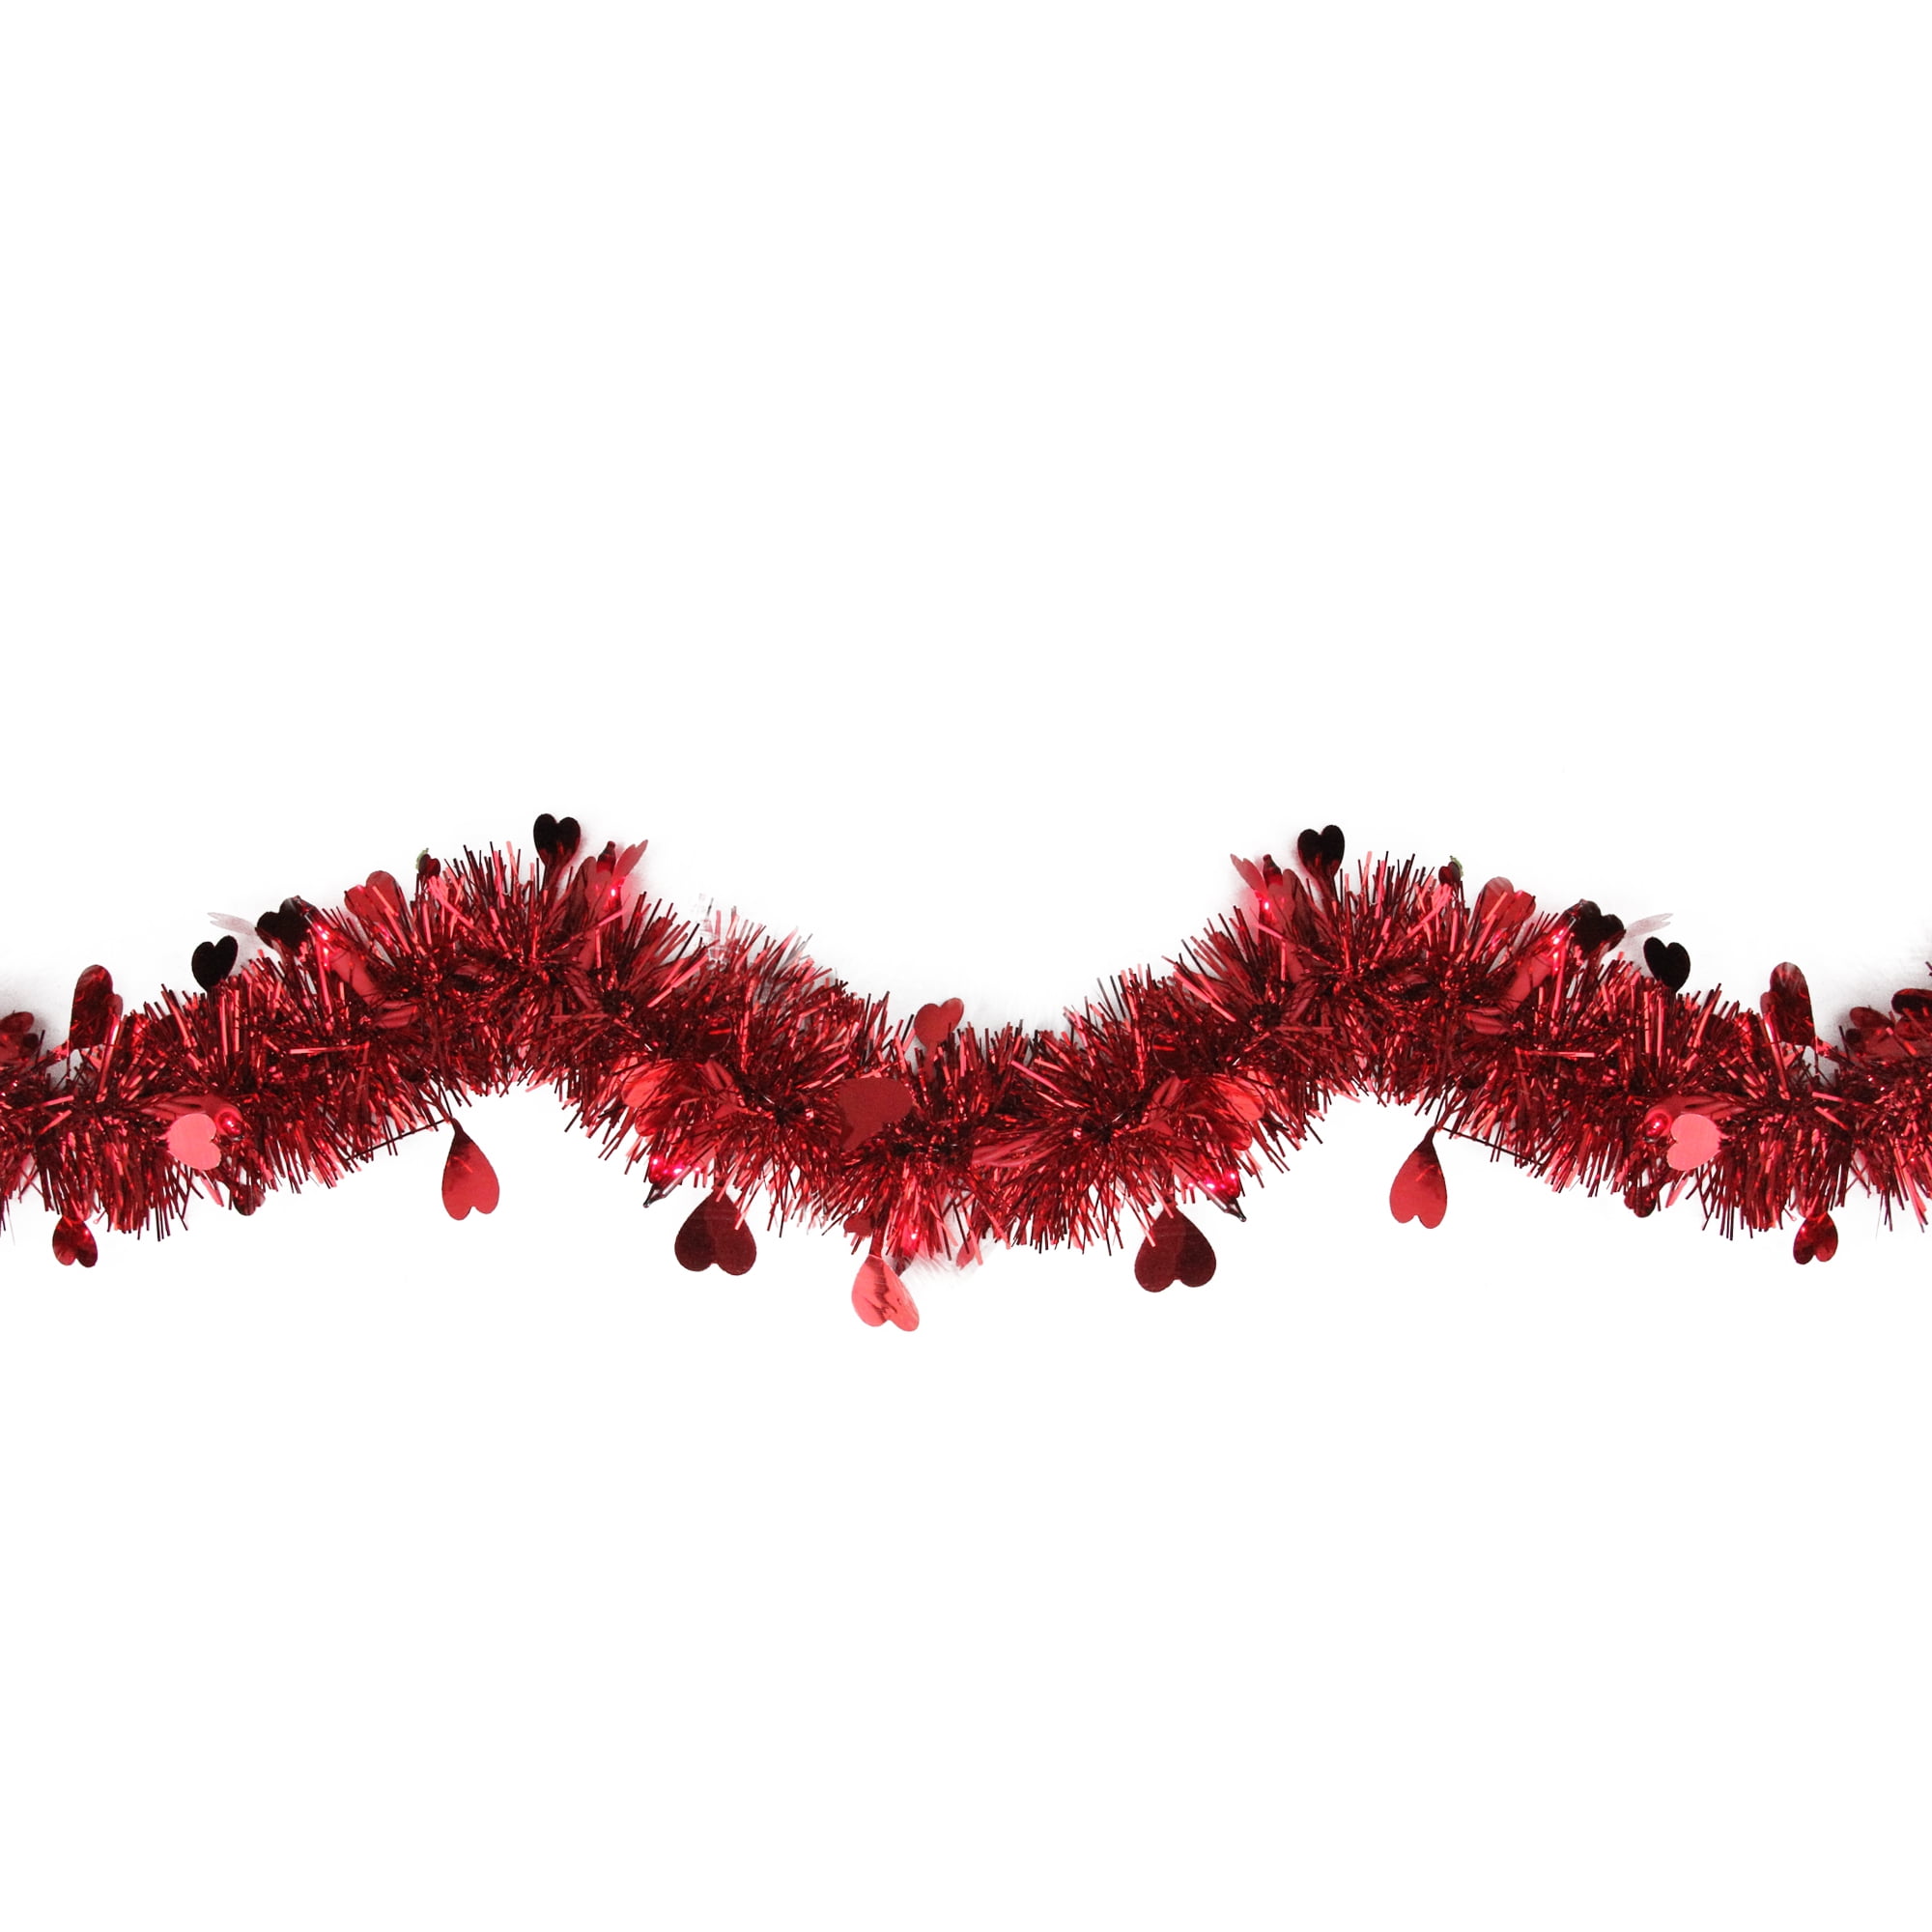 MOMENTUM* HANGING DECORATIONS Tinsel VALENTINES DAY Garland+Pillow *YOU CHOOSE*